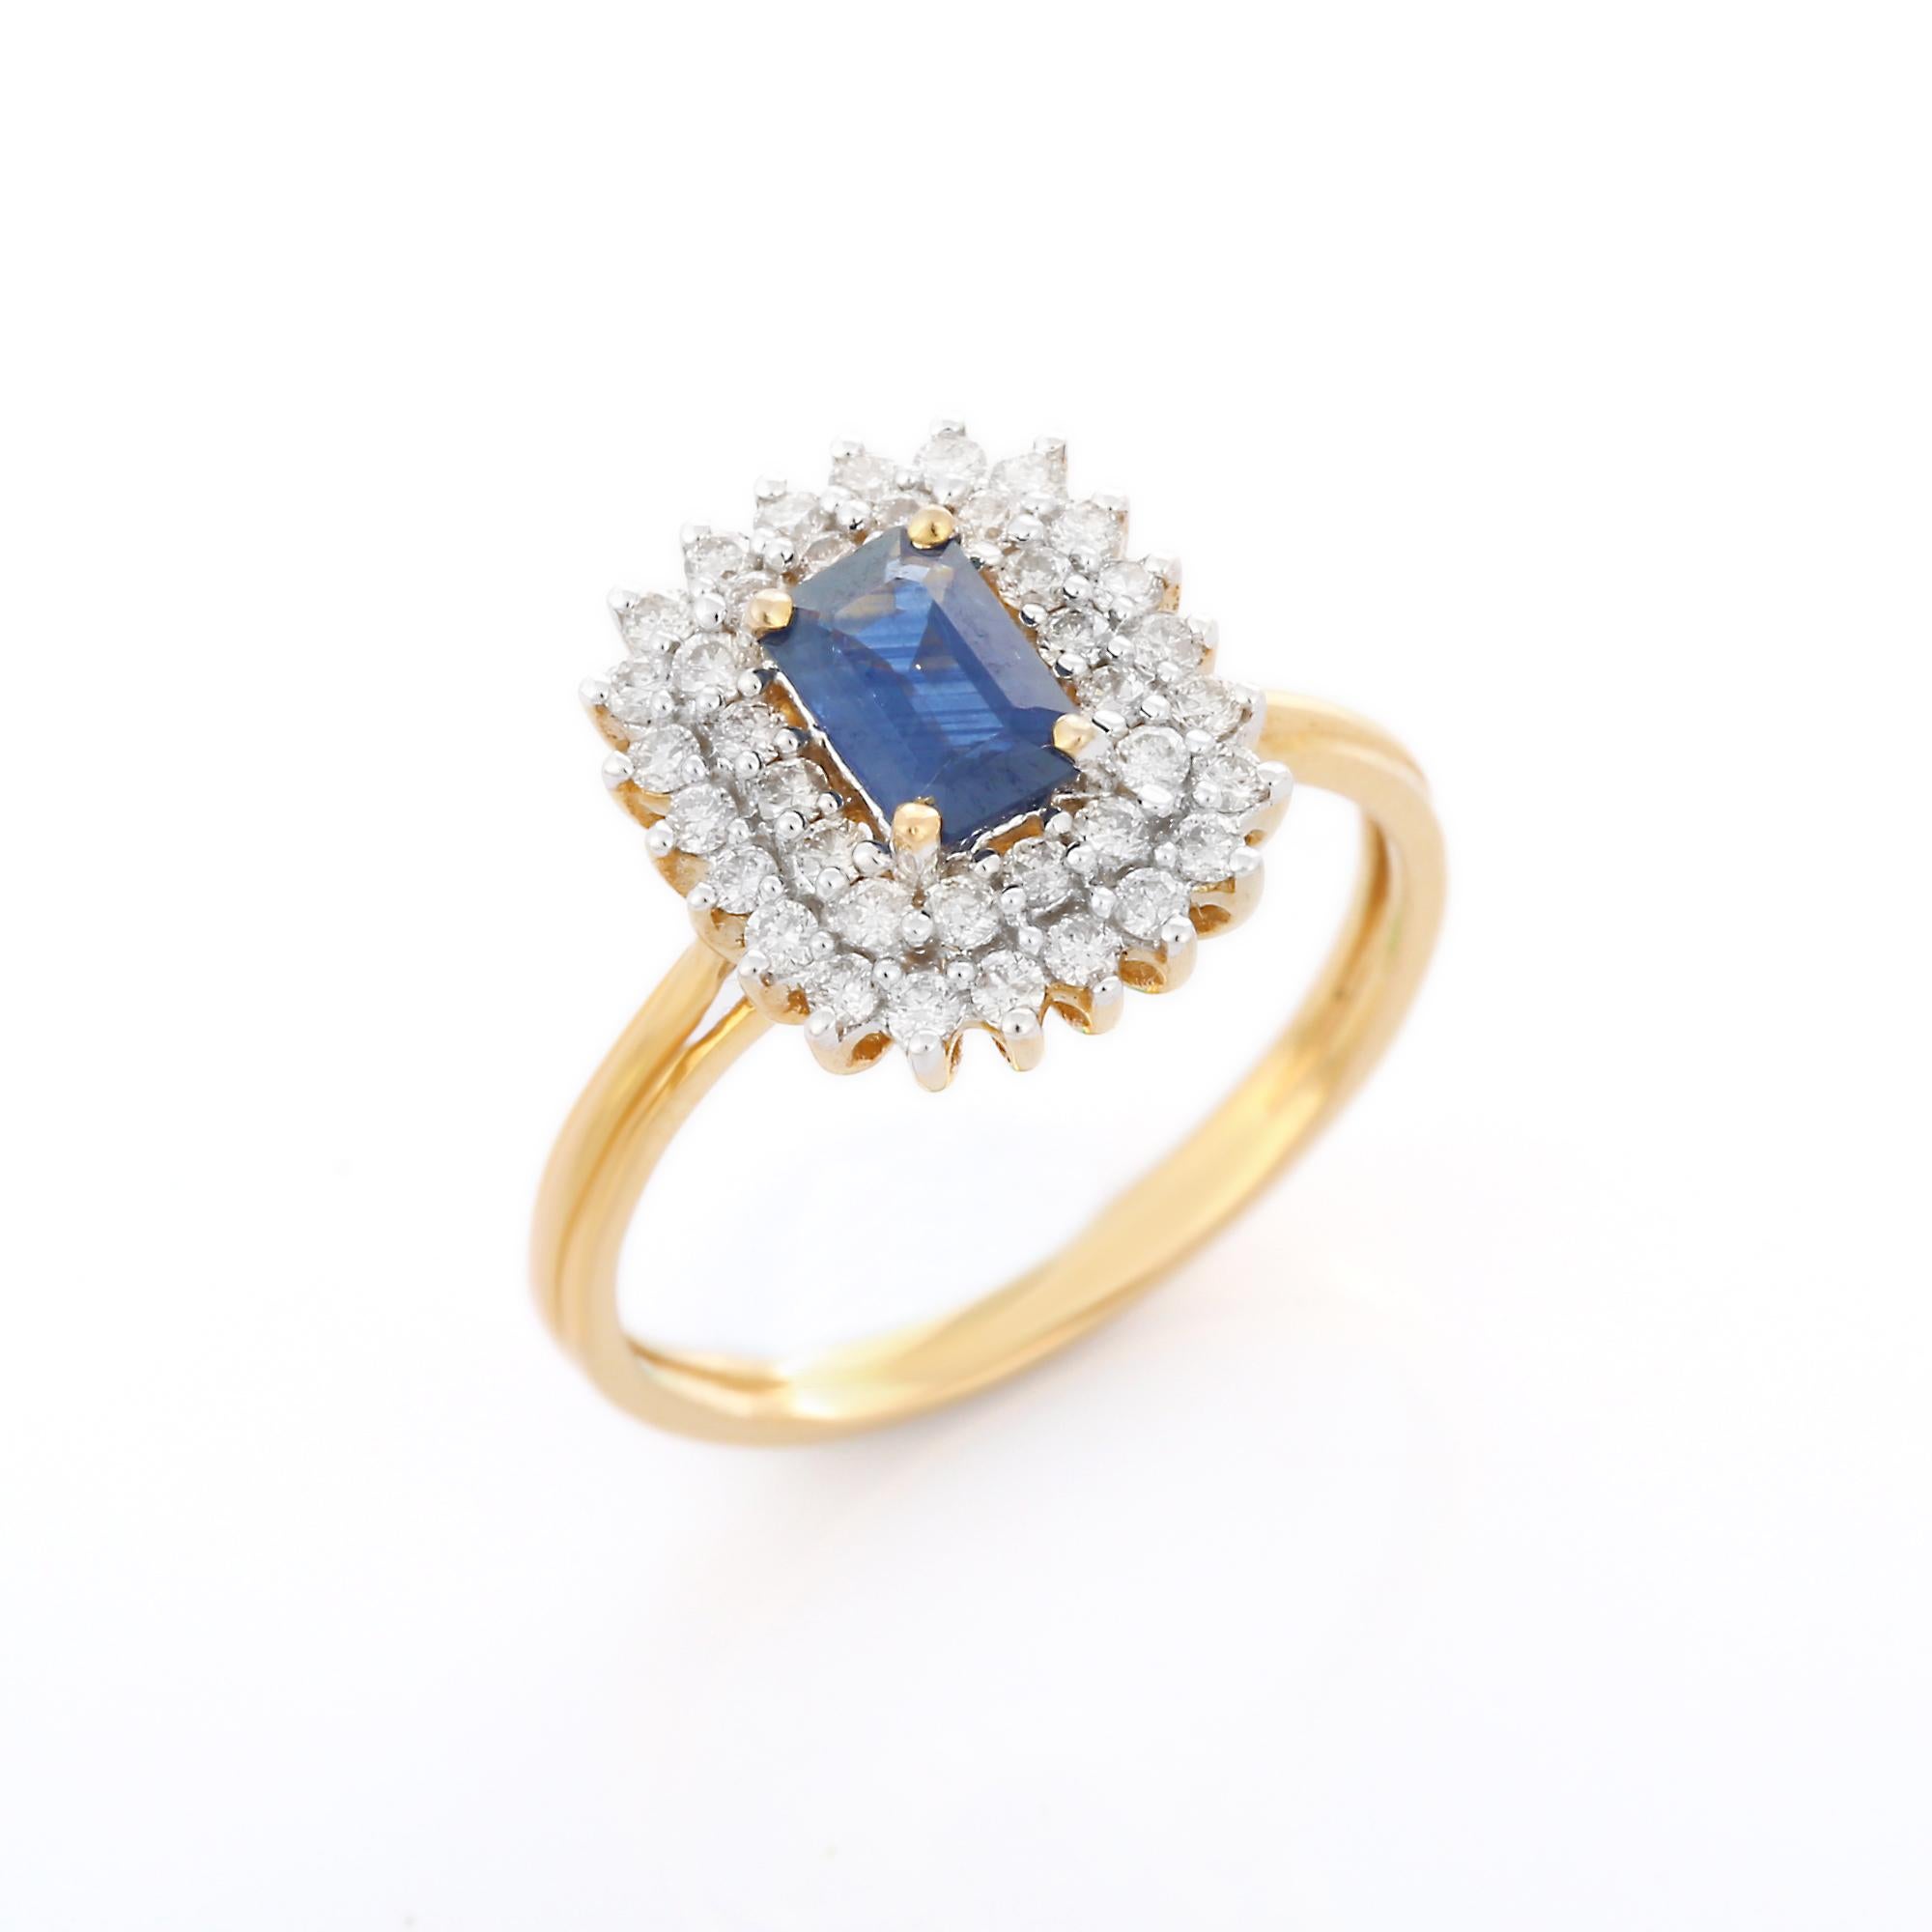 For Sale:  Regal Blue Sapphire Diamond Halo Wedding Ring in 18K Solid Yellow Gold 7